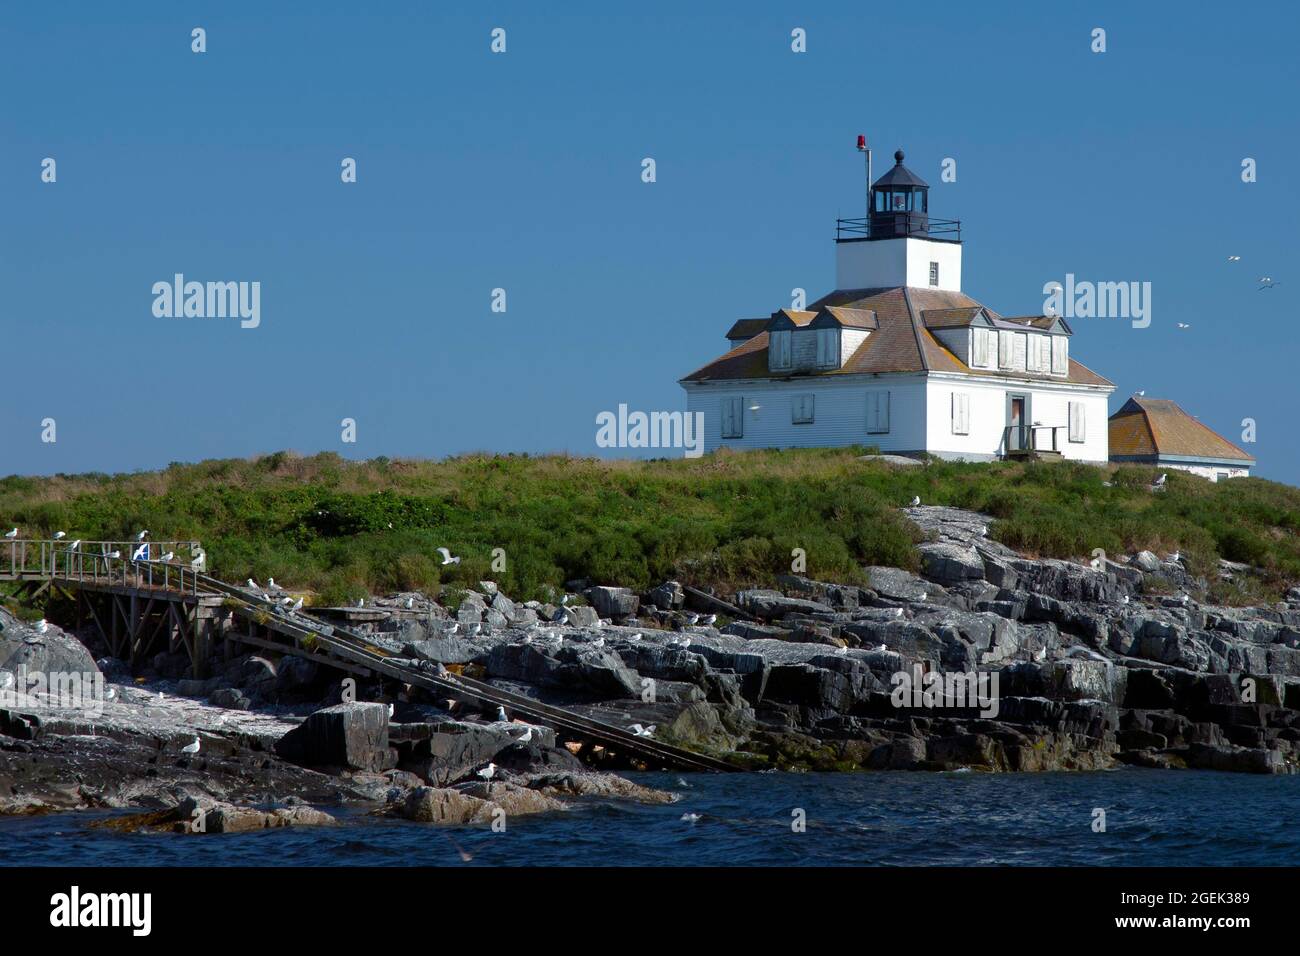 Seagulls around Egg Rock lighthouse in Acadia National Park, in Maine. The island is bird sanctuary, as part of the Maine Coastal Islands Wildlife Ref Stock Photo